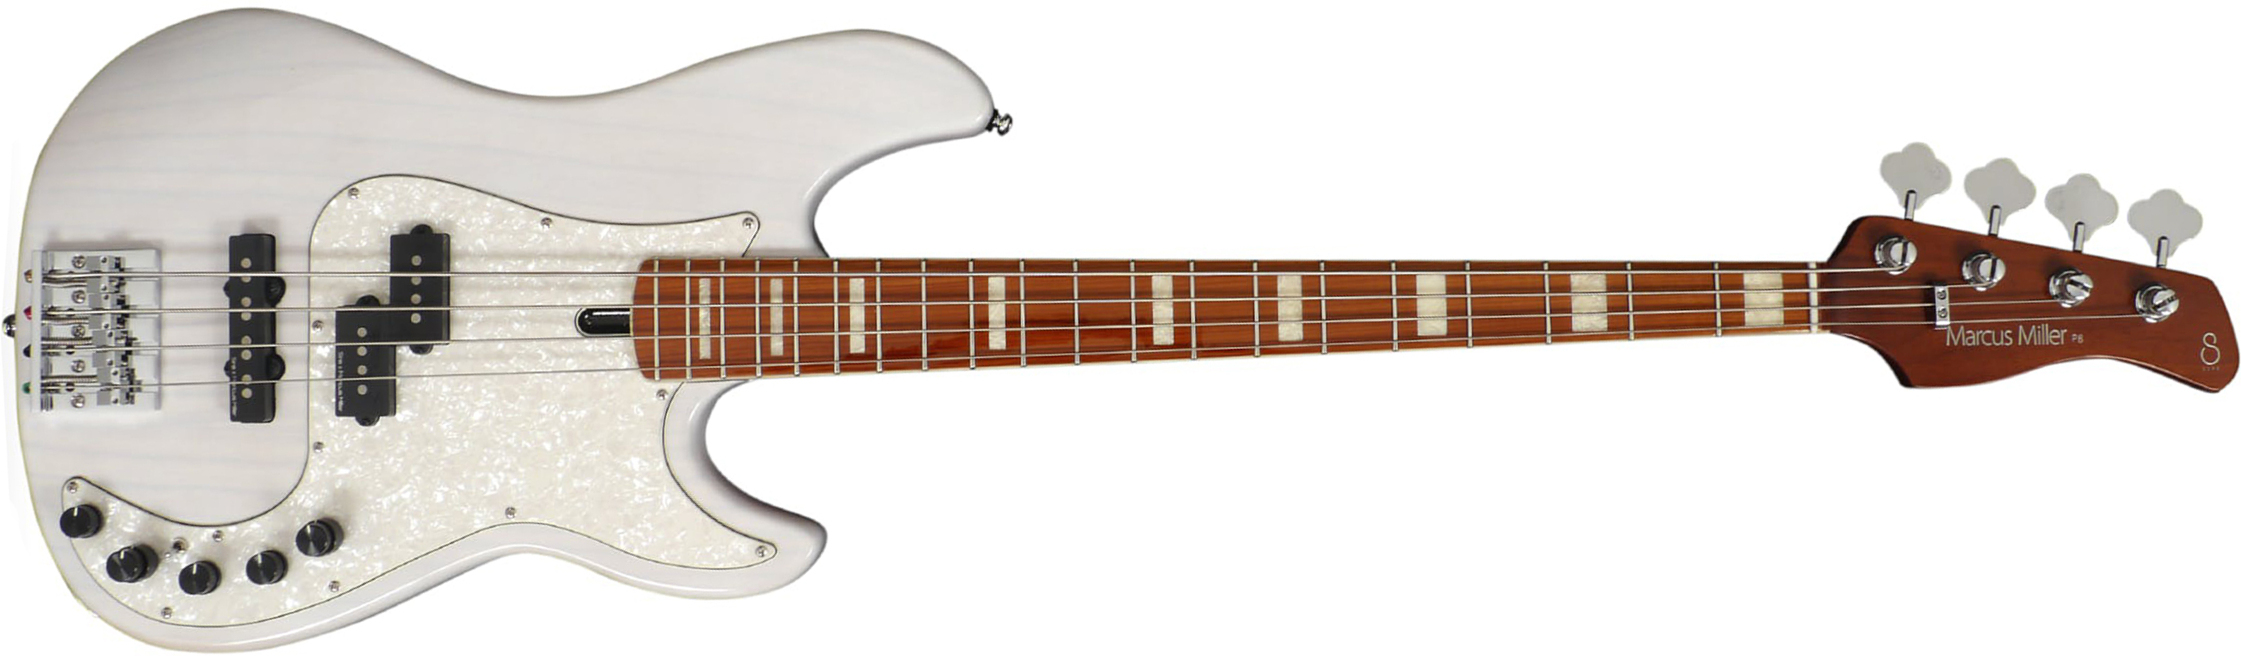 Marcus Miller P8 4st Active Mn - White Blonde - Solid body electric bass - Main picture